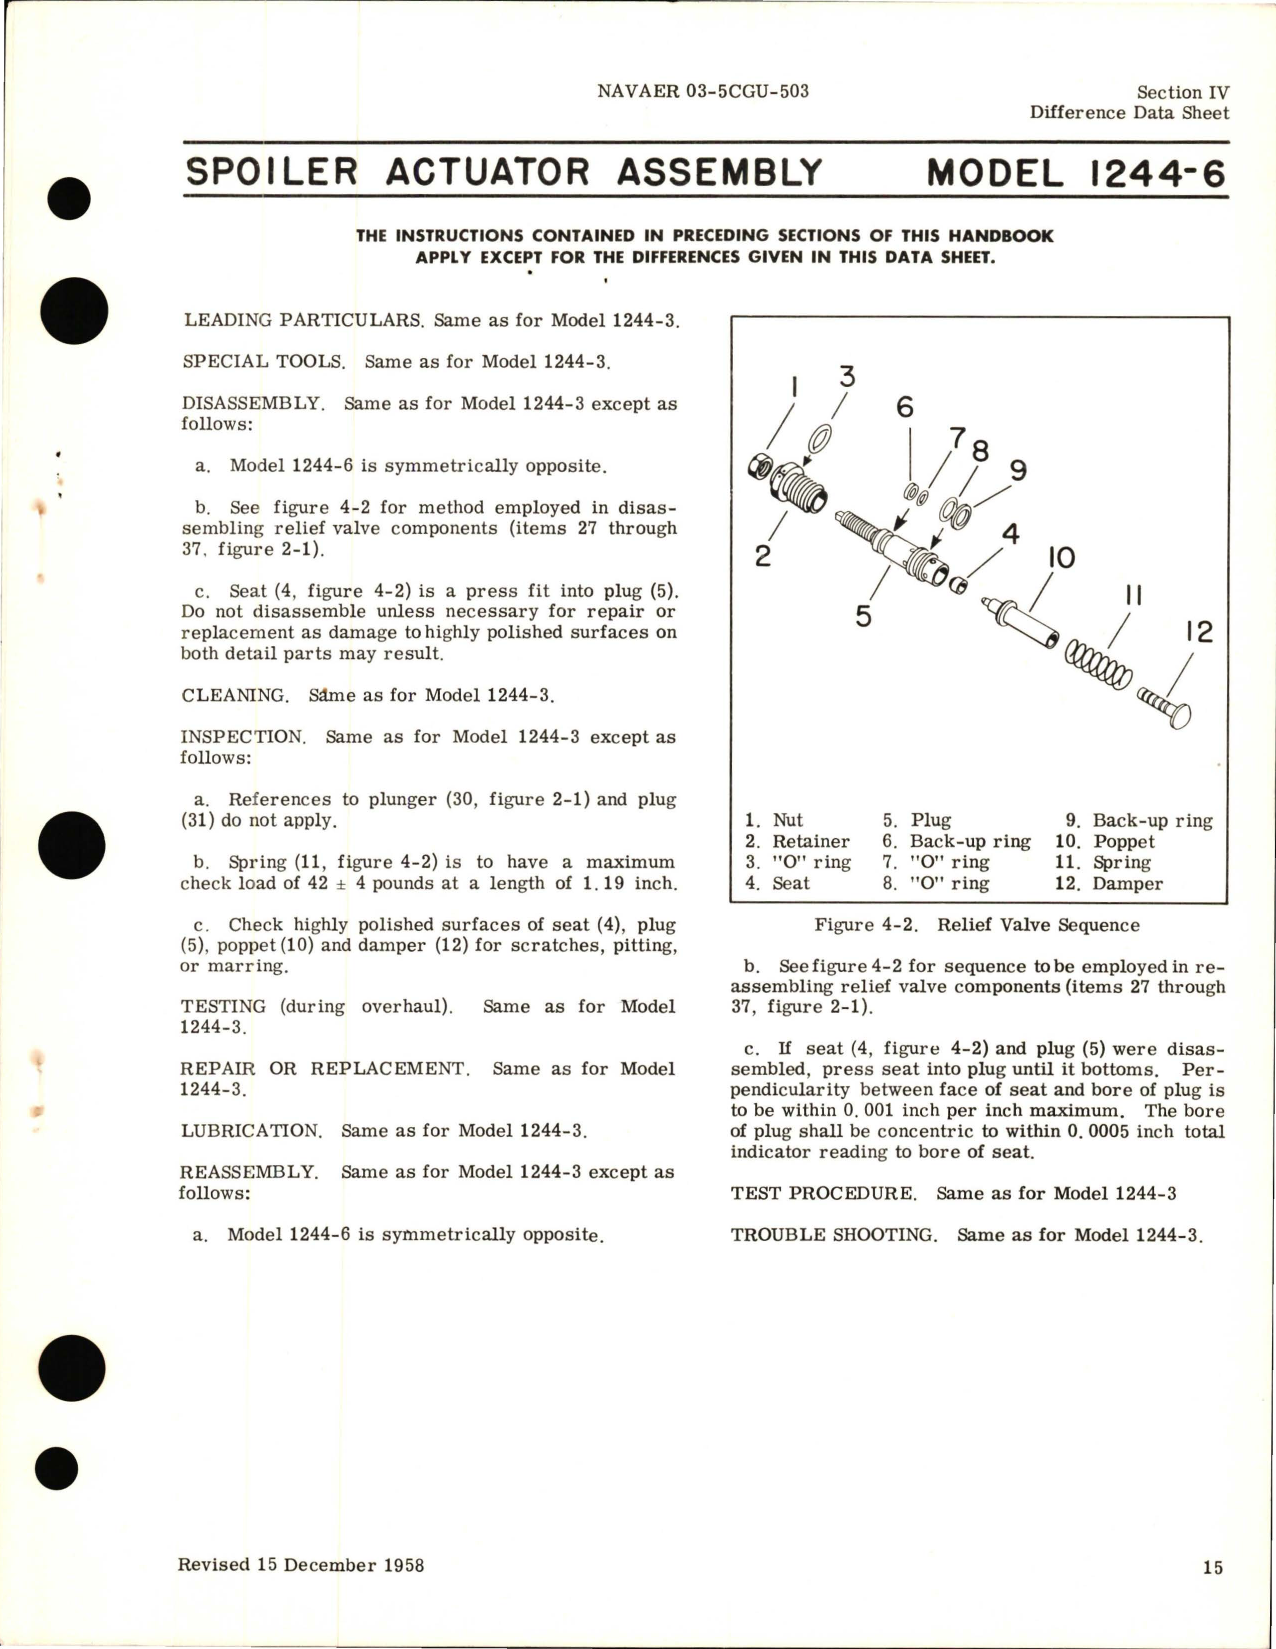 Sample page 7 from AirCorps Library document: Overhaul Instructions for Spoiler, Actuator - Part 124400 Series 